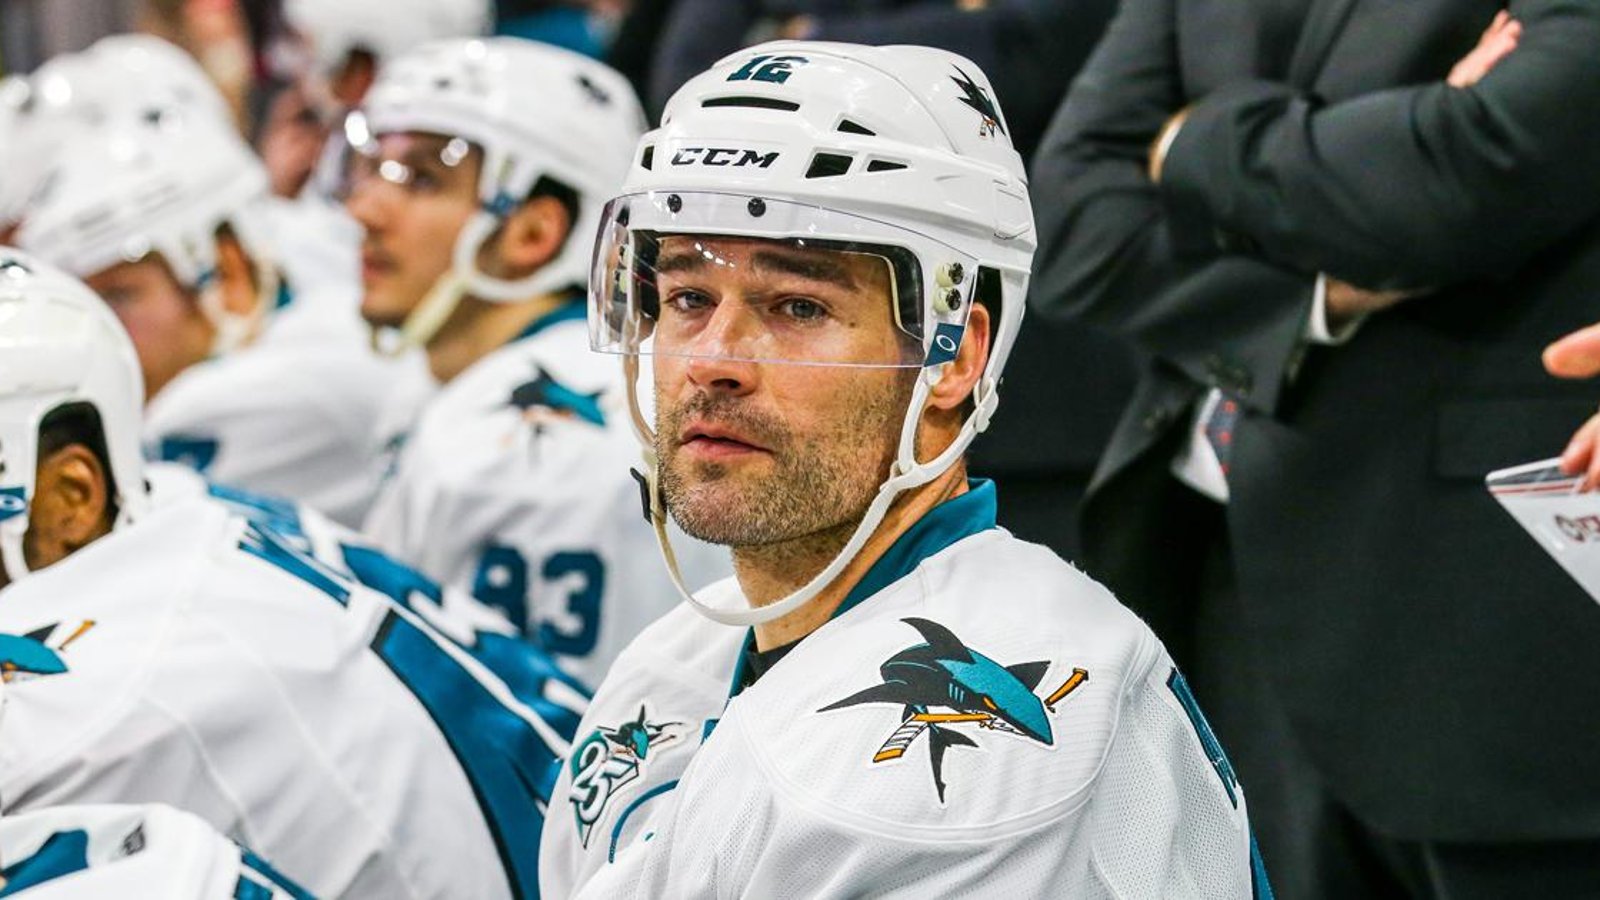 Patrick Marleau reacts to moving to Toronto. 